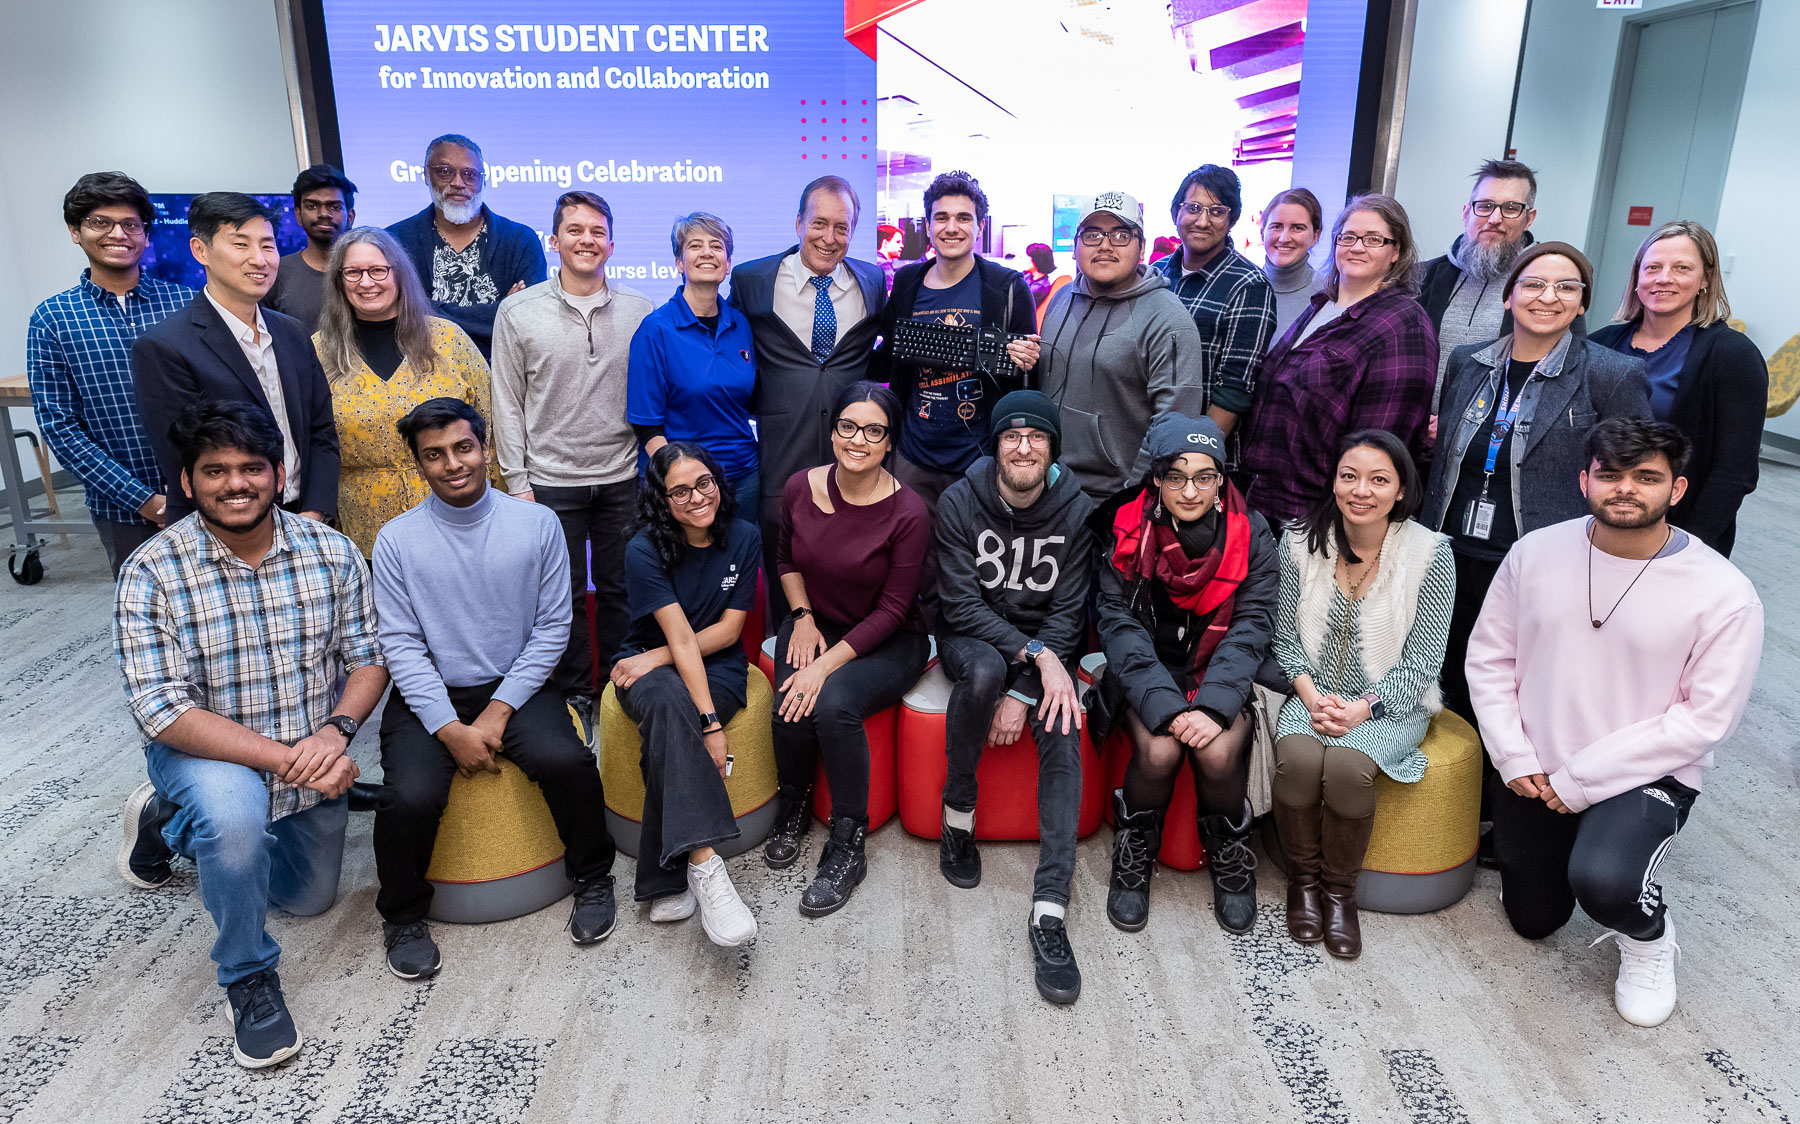 The Jarvis Student Center for Innovation and Collaboration was unveiled this past fall and is located in the concourse level of the DePaul Center on the Loop Campus.